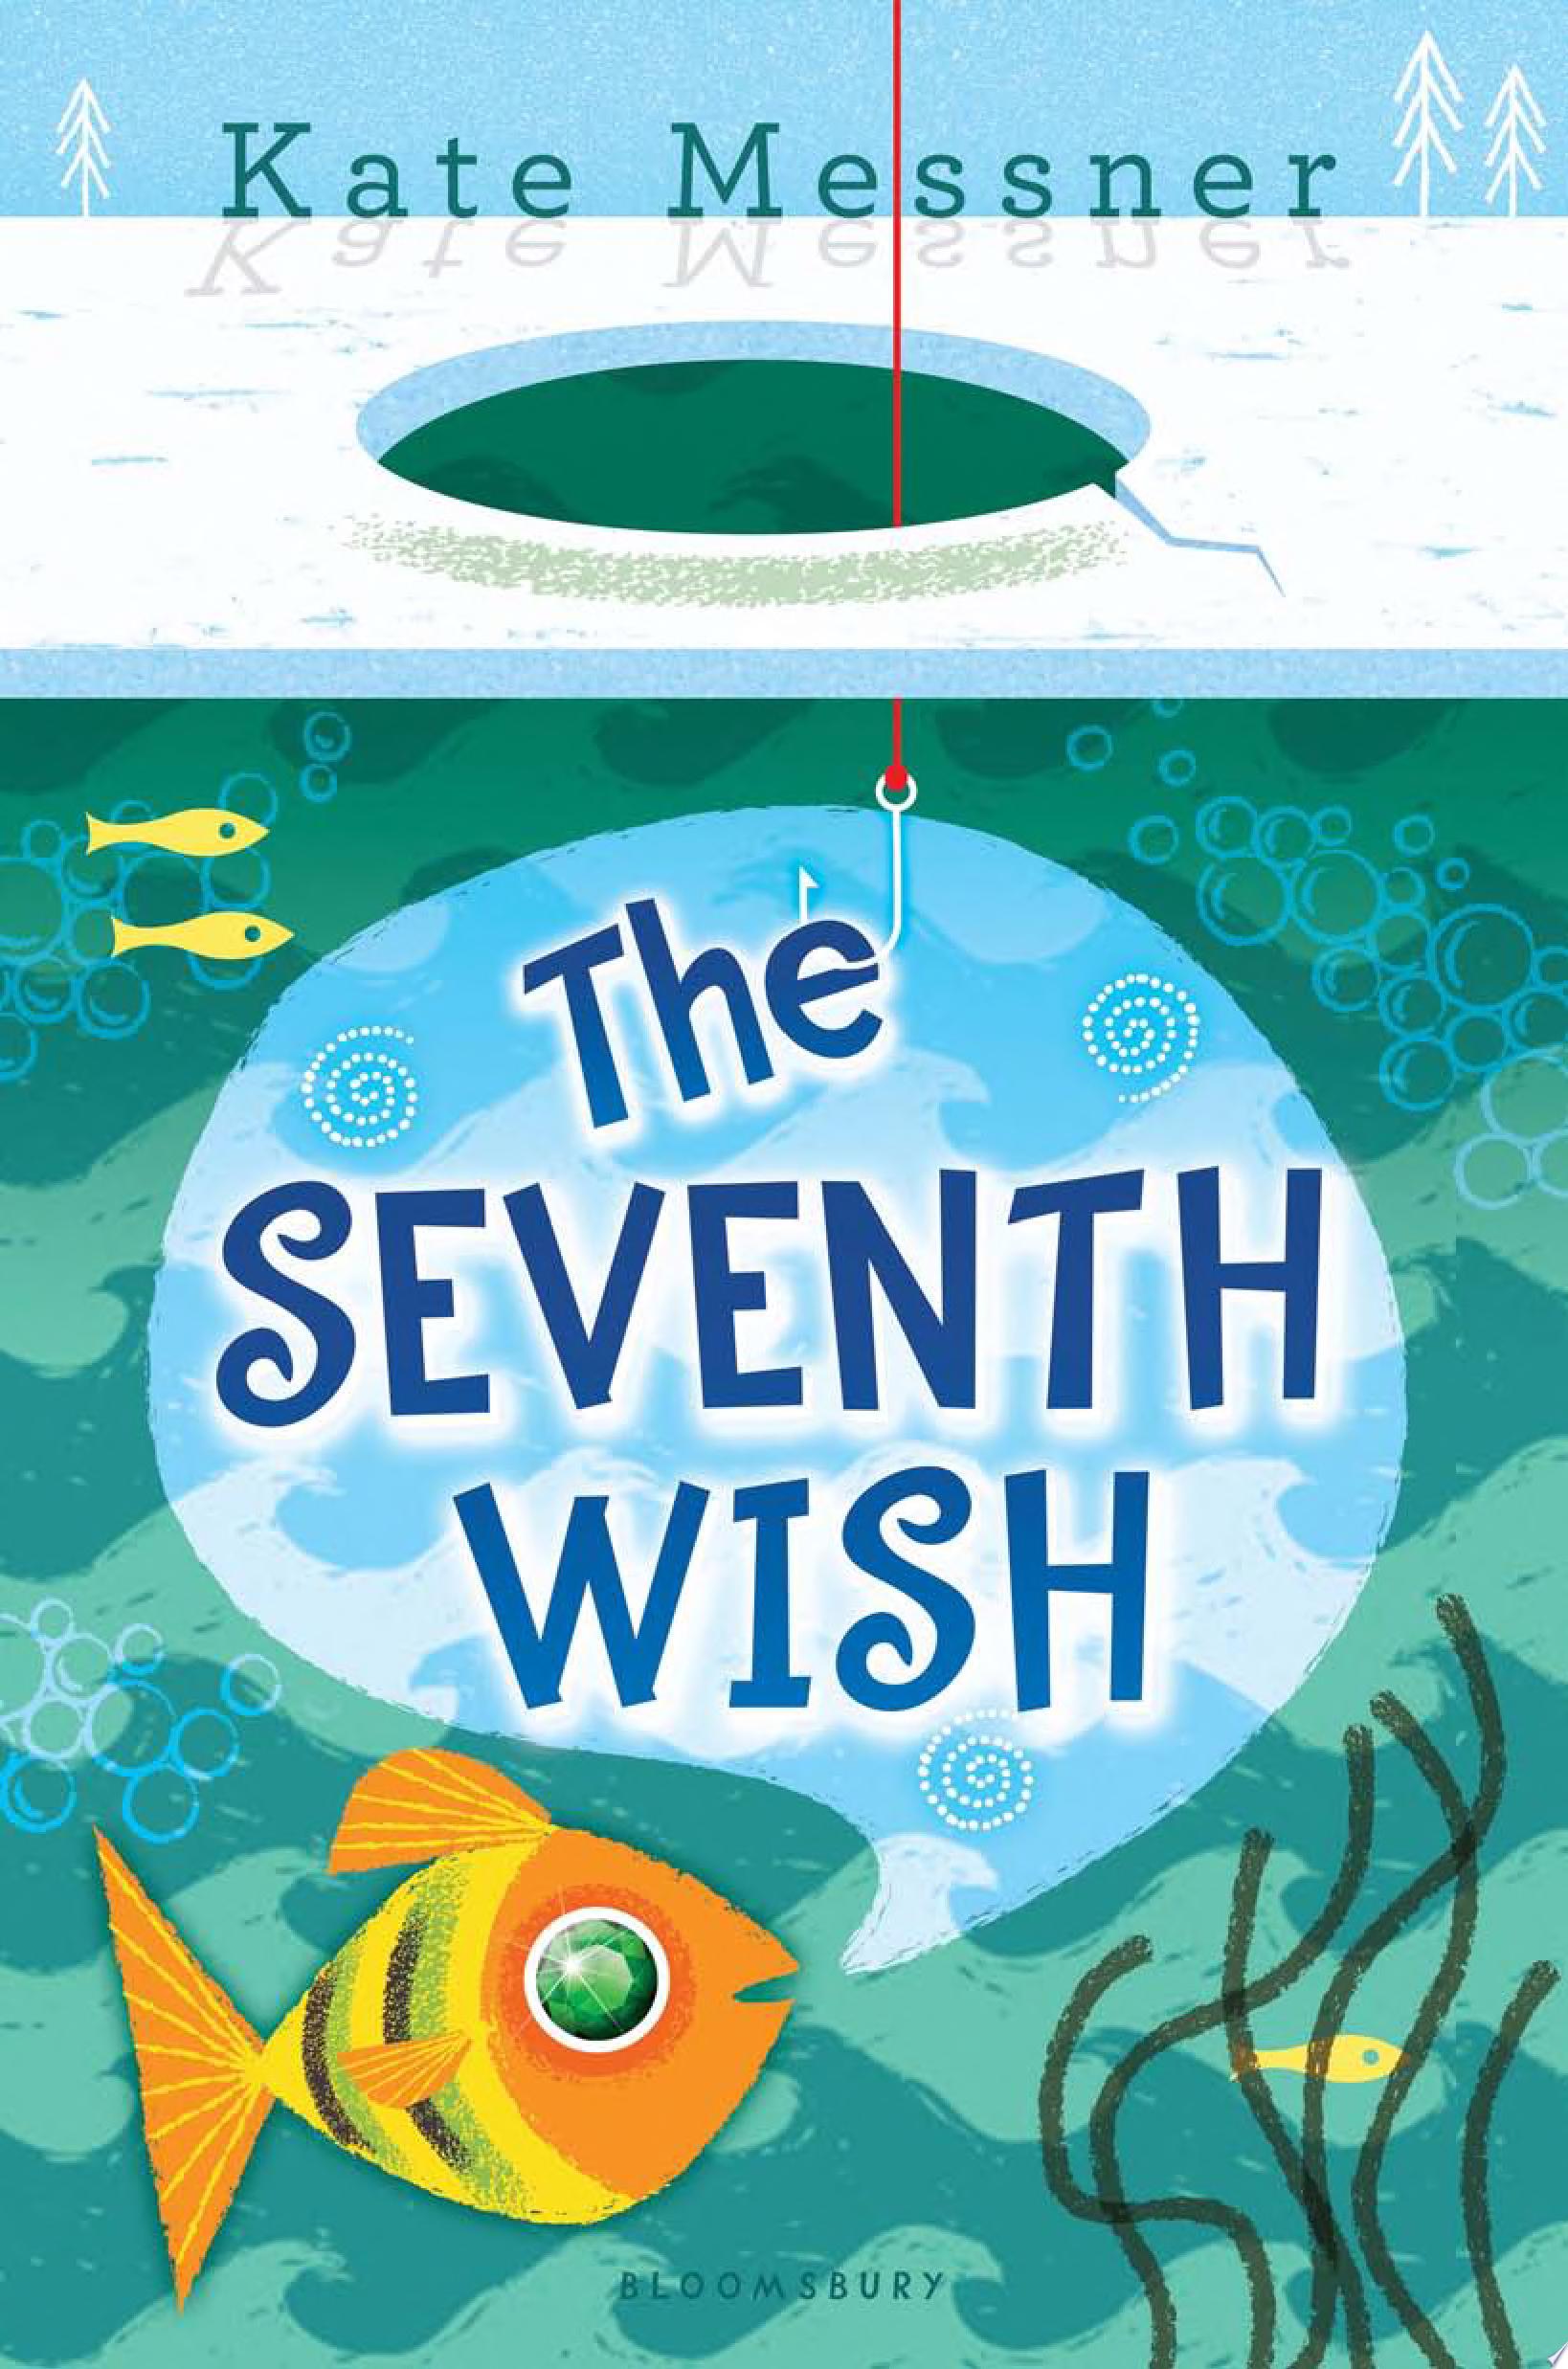 Image for "The Seventh Wish"